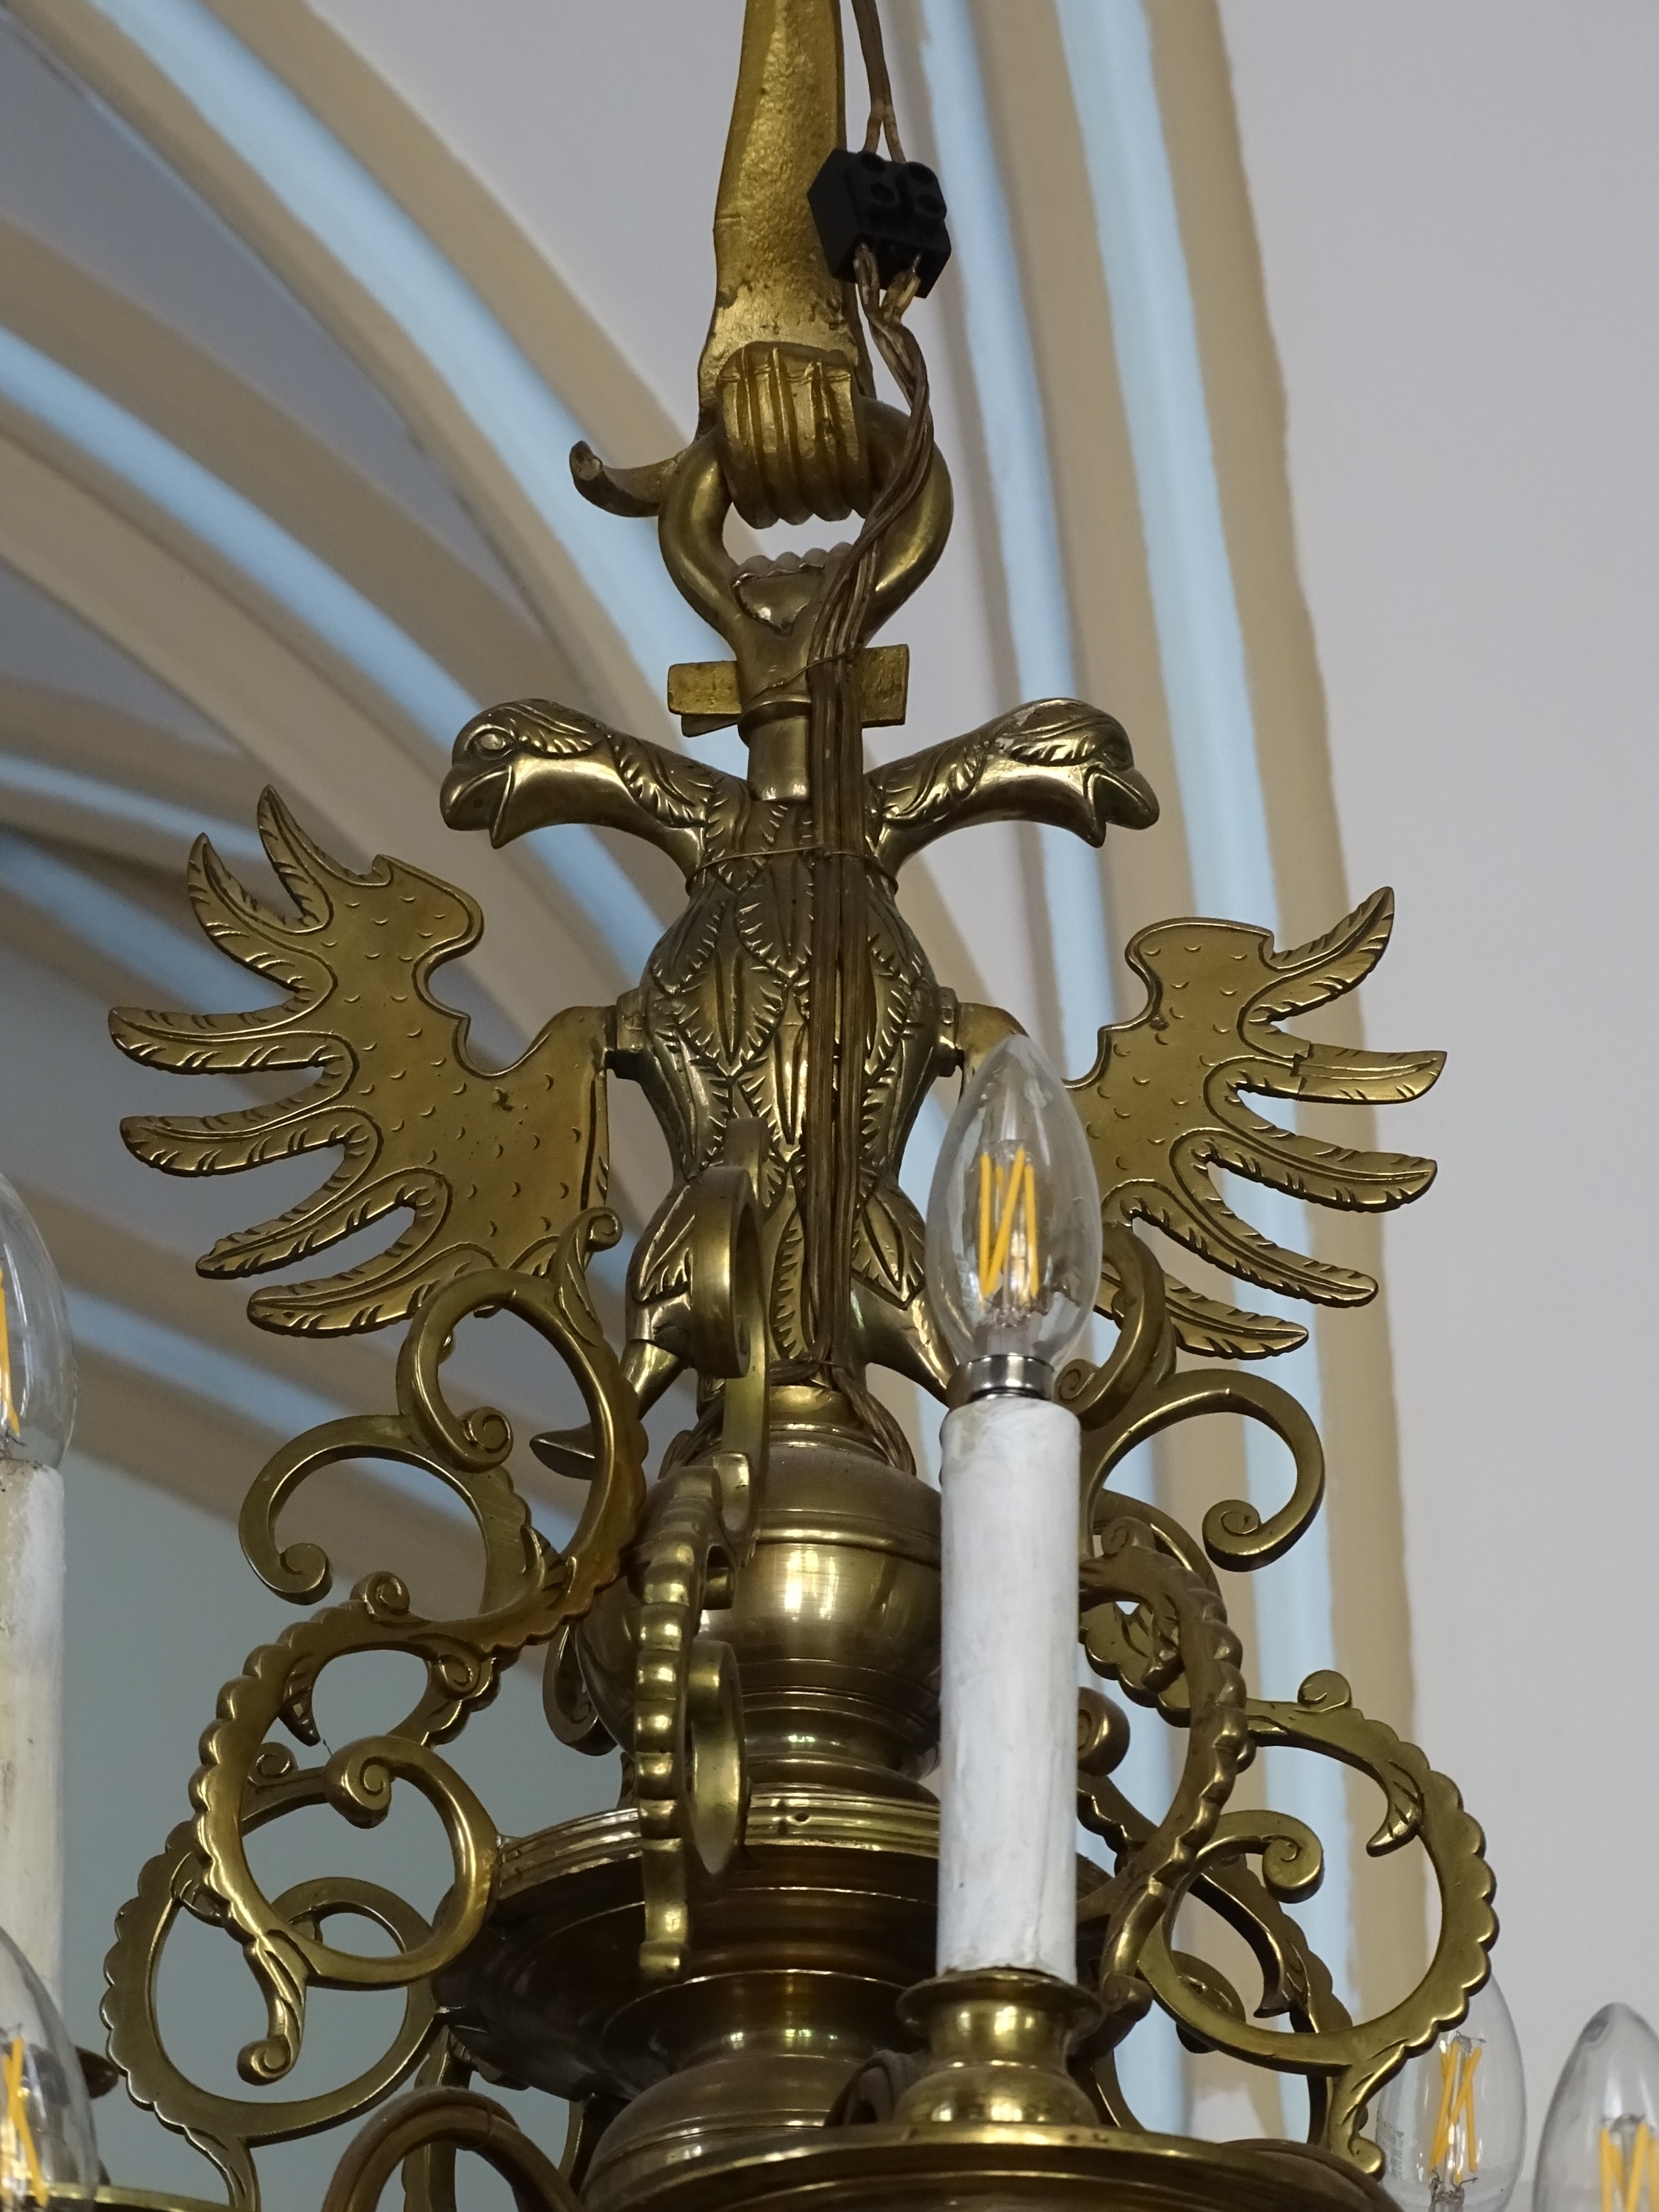 Fragment of the chandelier, 1649, Riga's Great Guild building. Photo by Alante Valtaite-Gagac, 2022